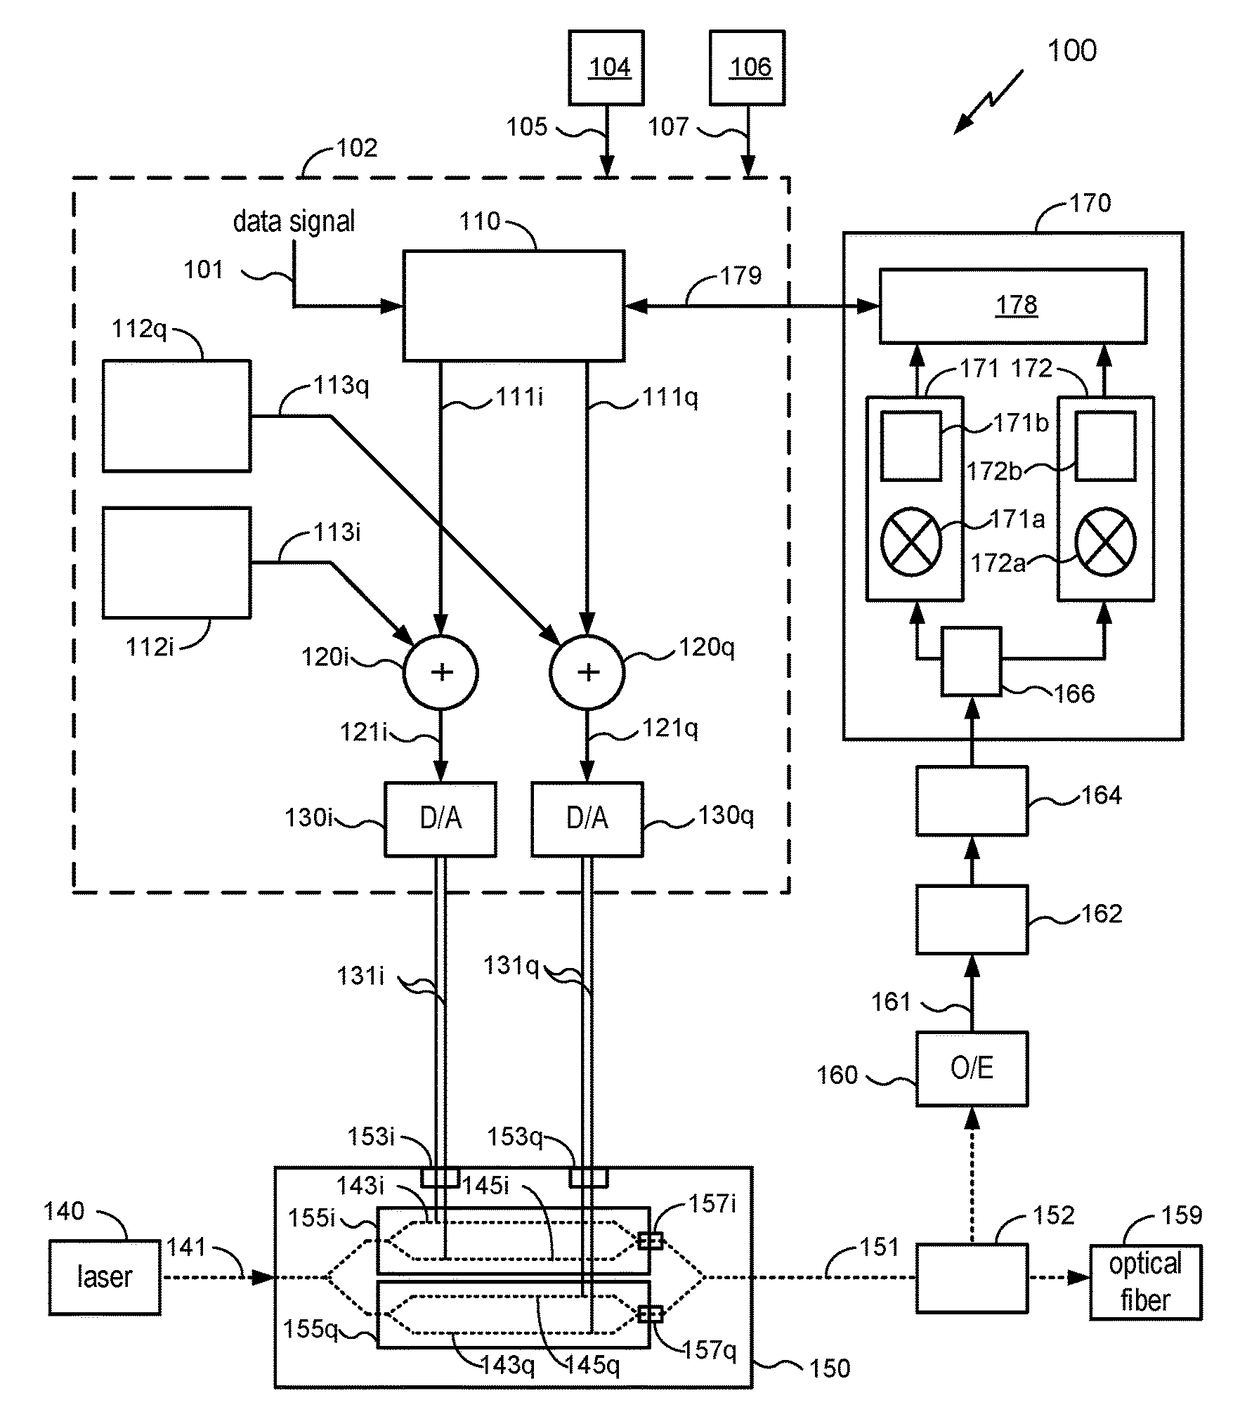 In-service skew monitoring in a nested Mach-Zehnder modulator structure using pilot signals and balanced phase detection